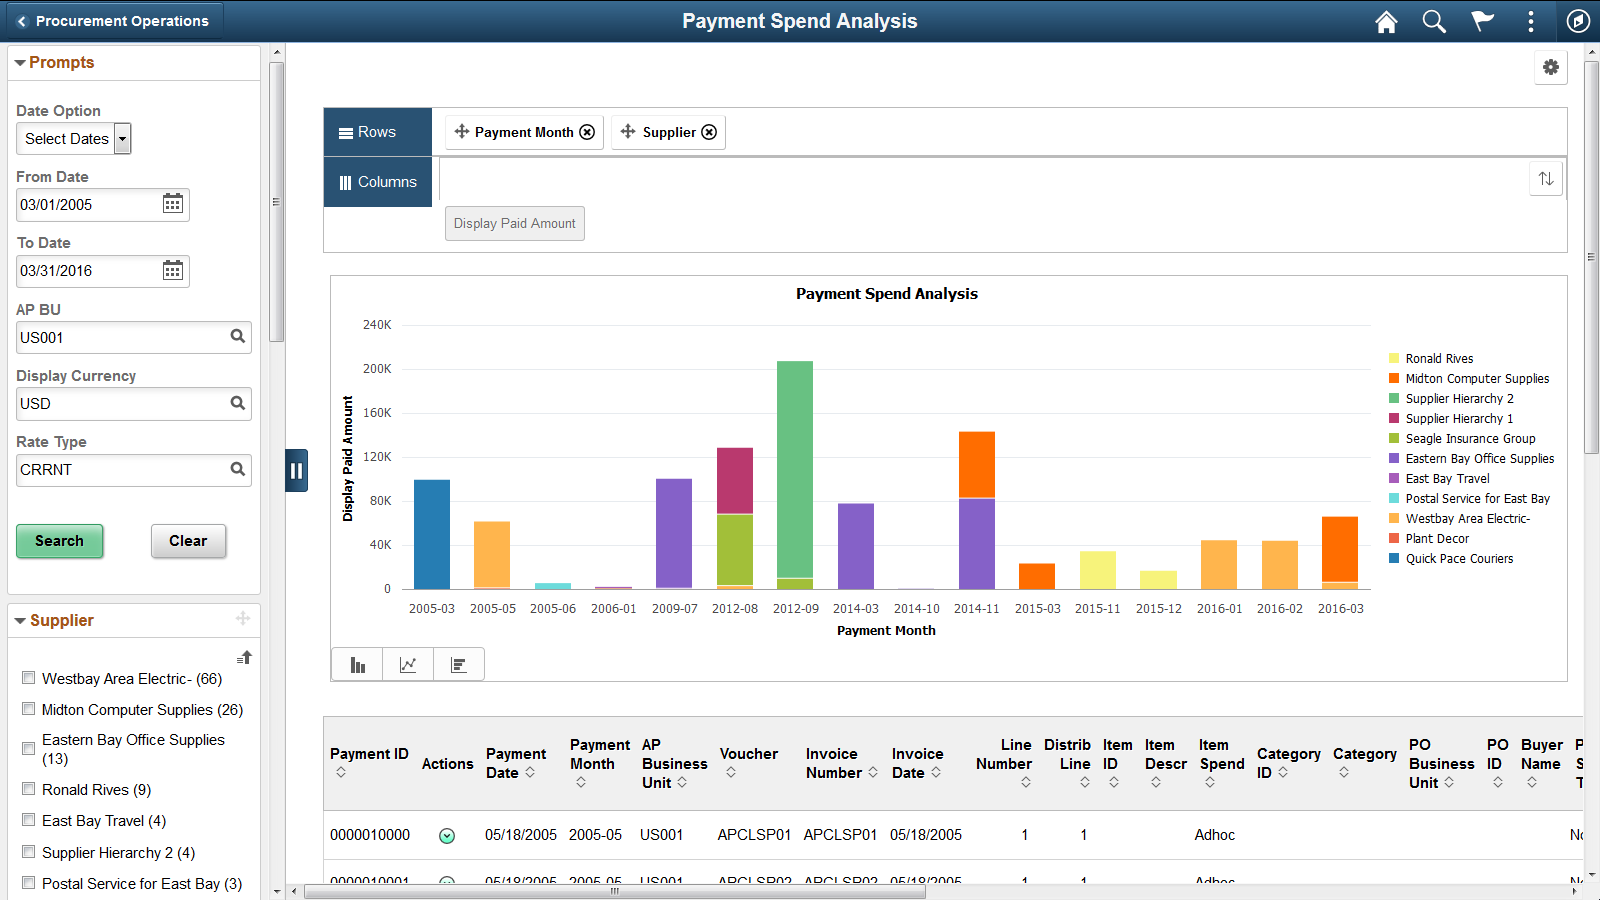 Payment Spend Analysis page